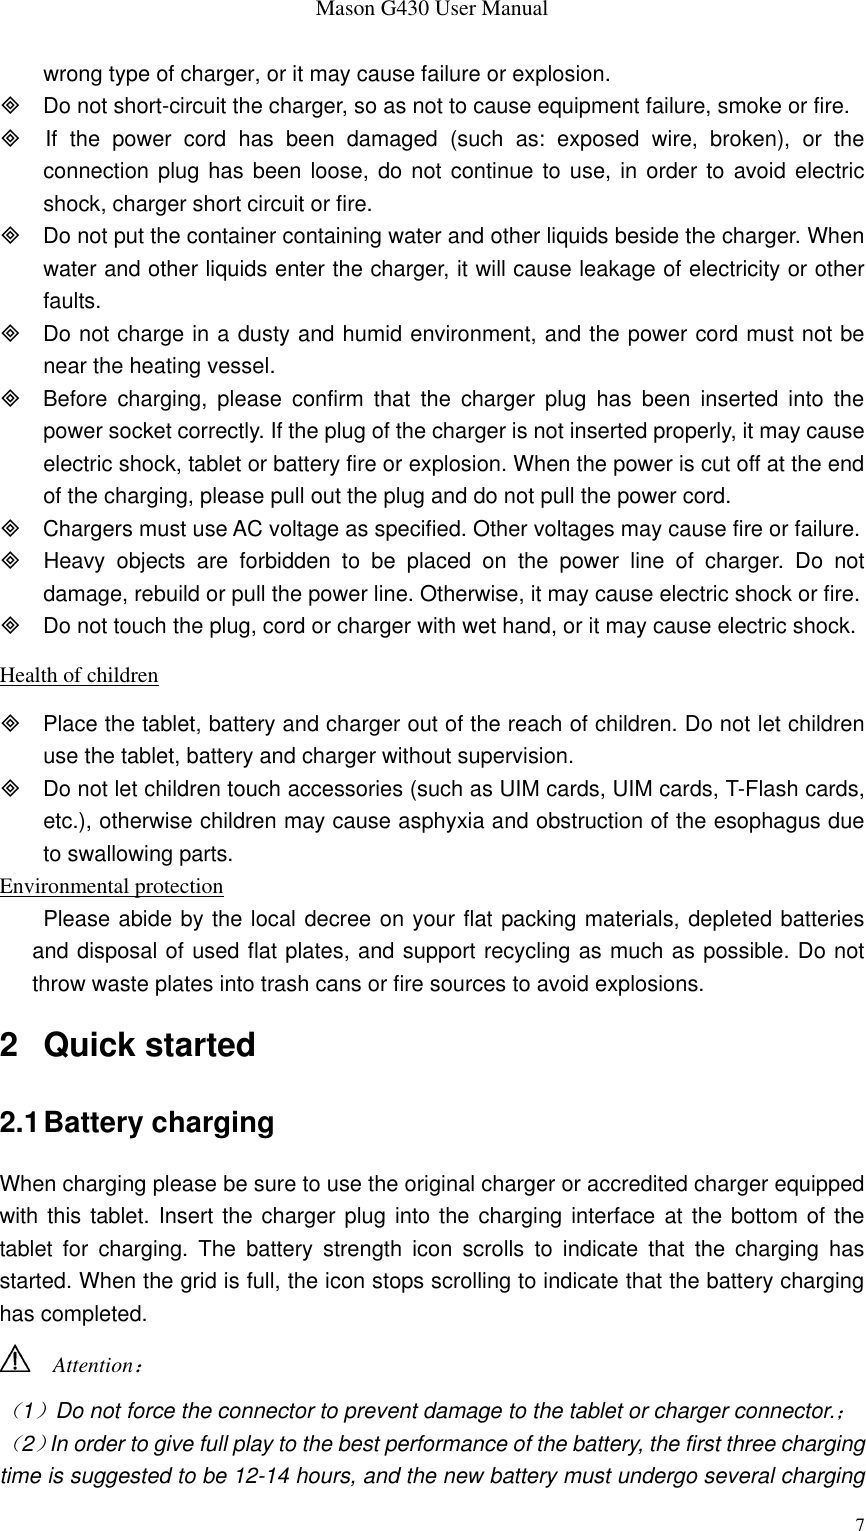 Mason G430 User Manual 7 wrong type of charger, or it may cause failure or explosion.   Do not short-circuit the charger, so as not to cause equipment failure, smoke or fire.   If  the  power  cord  has  been  damaged  (such  as:  exposed  wire,  broken),  or  the connection plug has been loose,  do not  continue to use, in order to avoid  electric shock, charger short circuit or fire.   Do not put the container containing water and other liquids beside the charger. When water and other liquids enter the charger, it will cause leakage of electricity or other faults.   Do not charge in a dusty and humid environment, and the power cord must not be near the heating vessel.   Before  charging,  please  confirm  that  the  charger  plug  has  been  inserted  into  the power socket correctly. If the plug of the charger is not inserted properly, it may cause electric shock, tablet or battery fire or explosion. When the power is cut off at the end of the charging, please pull out the plug and do not pull the power cord.   Chargers must use AC voltage as specified. Other voltages may cause fire or failure.   Heavy  objects  are  forbidden  to  be  placed  on  the  power  line  of  charger.  Do  not damage, rebuild or pull the power line. Otherwise, it may cause electric shock or fire.   Do not touch the plug, cord or charger with wet hand, or it may cause electric shock. Health of children   Place the tablet, battery and charger out of the reach of children. Do not let children use the tablet, battery and charger without supervision.   Do not let children touch accessories (such as UIM cards, UIM cards, T-Flash cards, etc.), otherwise children may cause asphyxia and obstruction of the esophagus due to swallowing parts. Environmental protection Please abide by the local decree on your flat packing materials, depleted batteries and disposal of used flat plates, and support recycling as much as possible. Do not throw waste plates into trash cans or fire sources to avoid explosions. 2  Quick started 2.1 Battery charging When charging please be sure to use the original charger or accredited charger equipped with this tablet. Insert the charger plug into the charging interface  at the bottom of the tablet  for  charging.  The  battery  strength  icon  scrolls  to  indicate  that  the  charging  has started. When the grid is full, the icon stops scrolling to indicate that the battery charging has completed.   Attention： （1）Do not force the connector to prevent damage to the tablet or charger connector.； （2）In order to give full play to the best performance of the battery, the first three charging time is suggested to be 12-14 hours, and the new battery must undergo several charging 